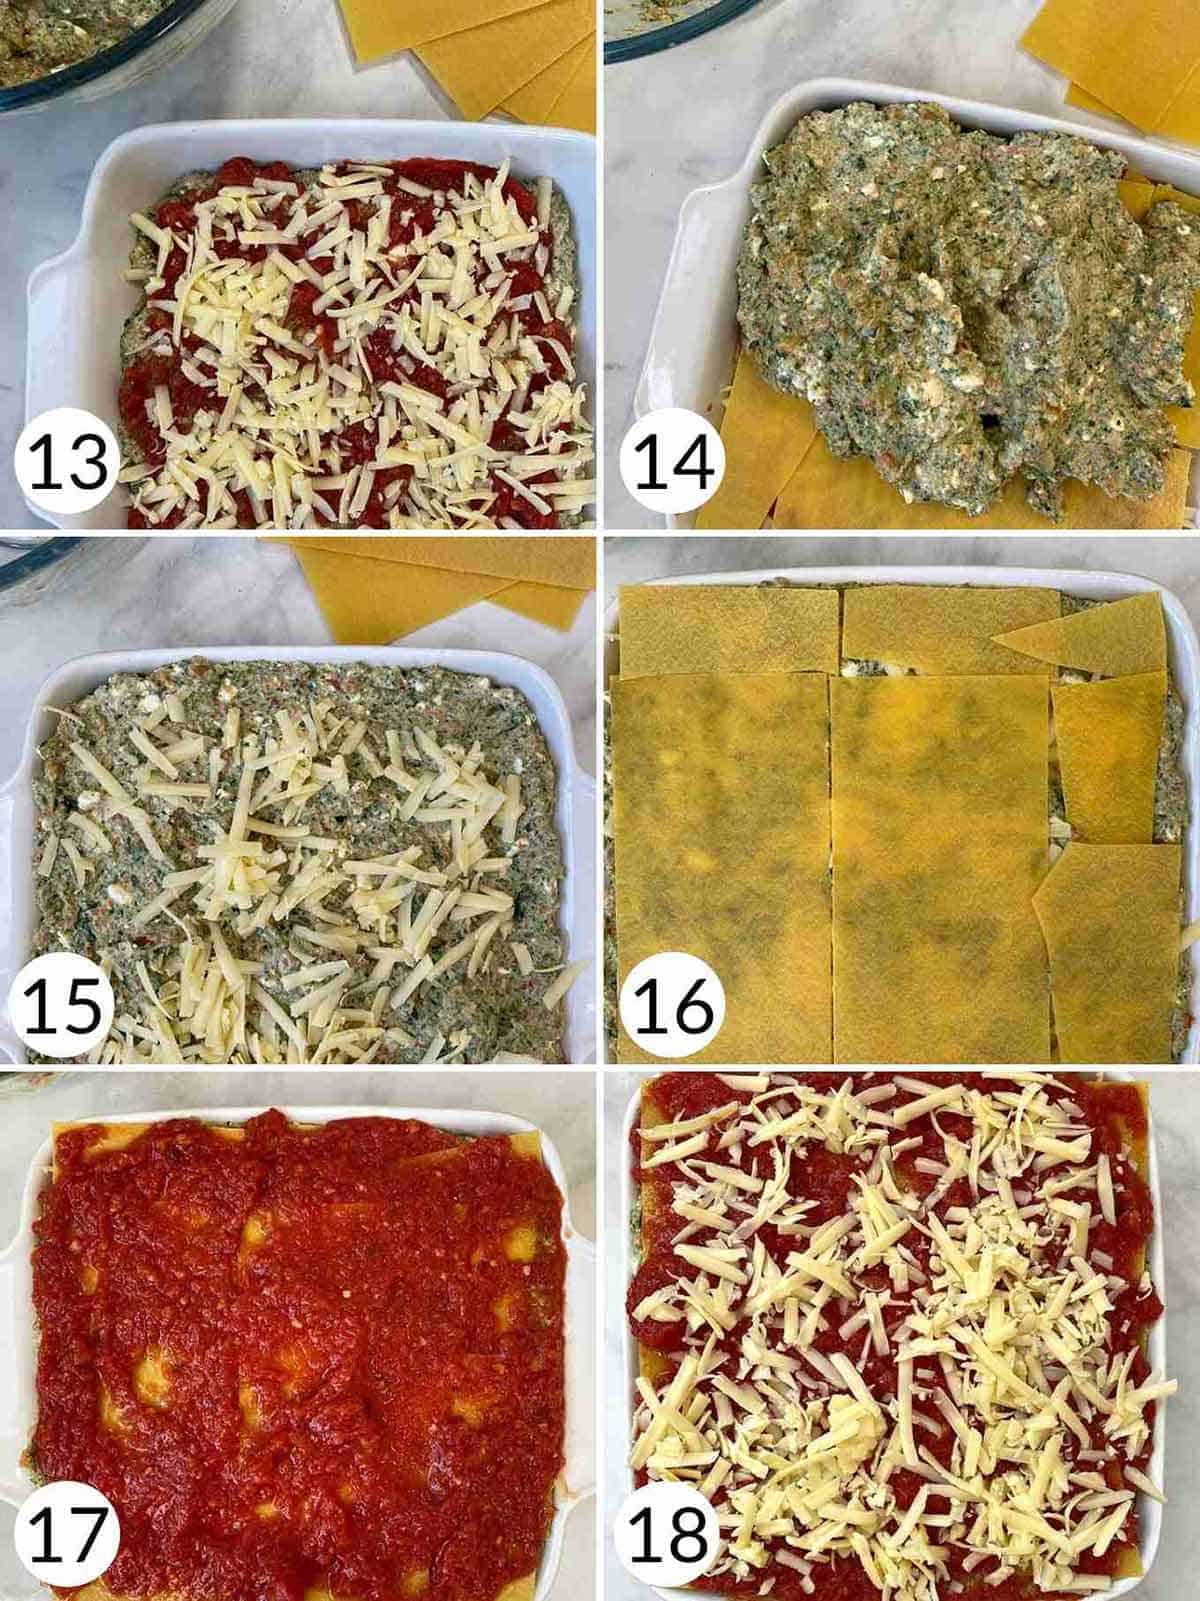 6 pictures of putting together a vegetable lasagna